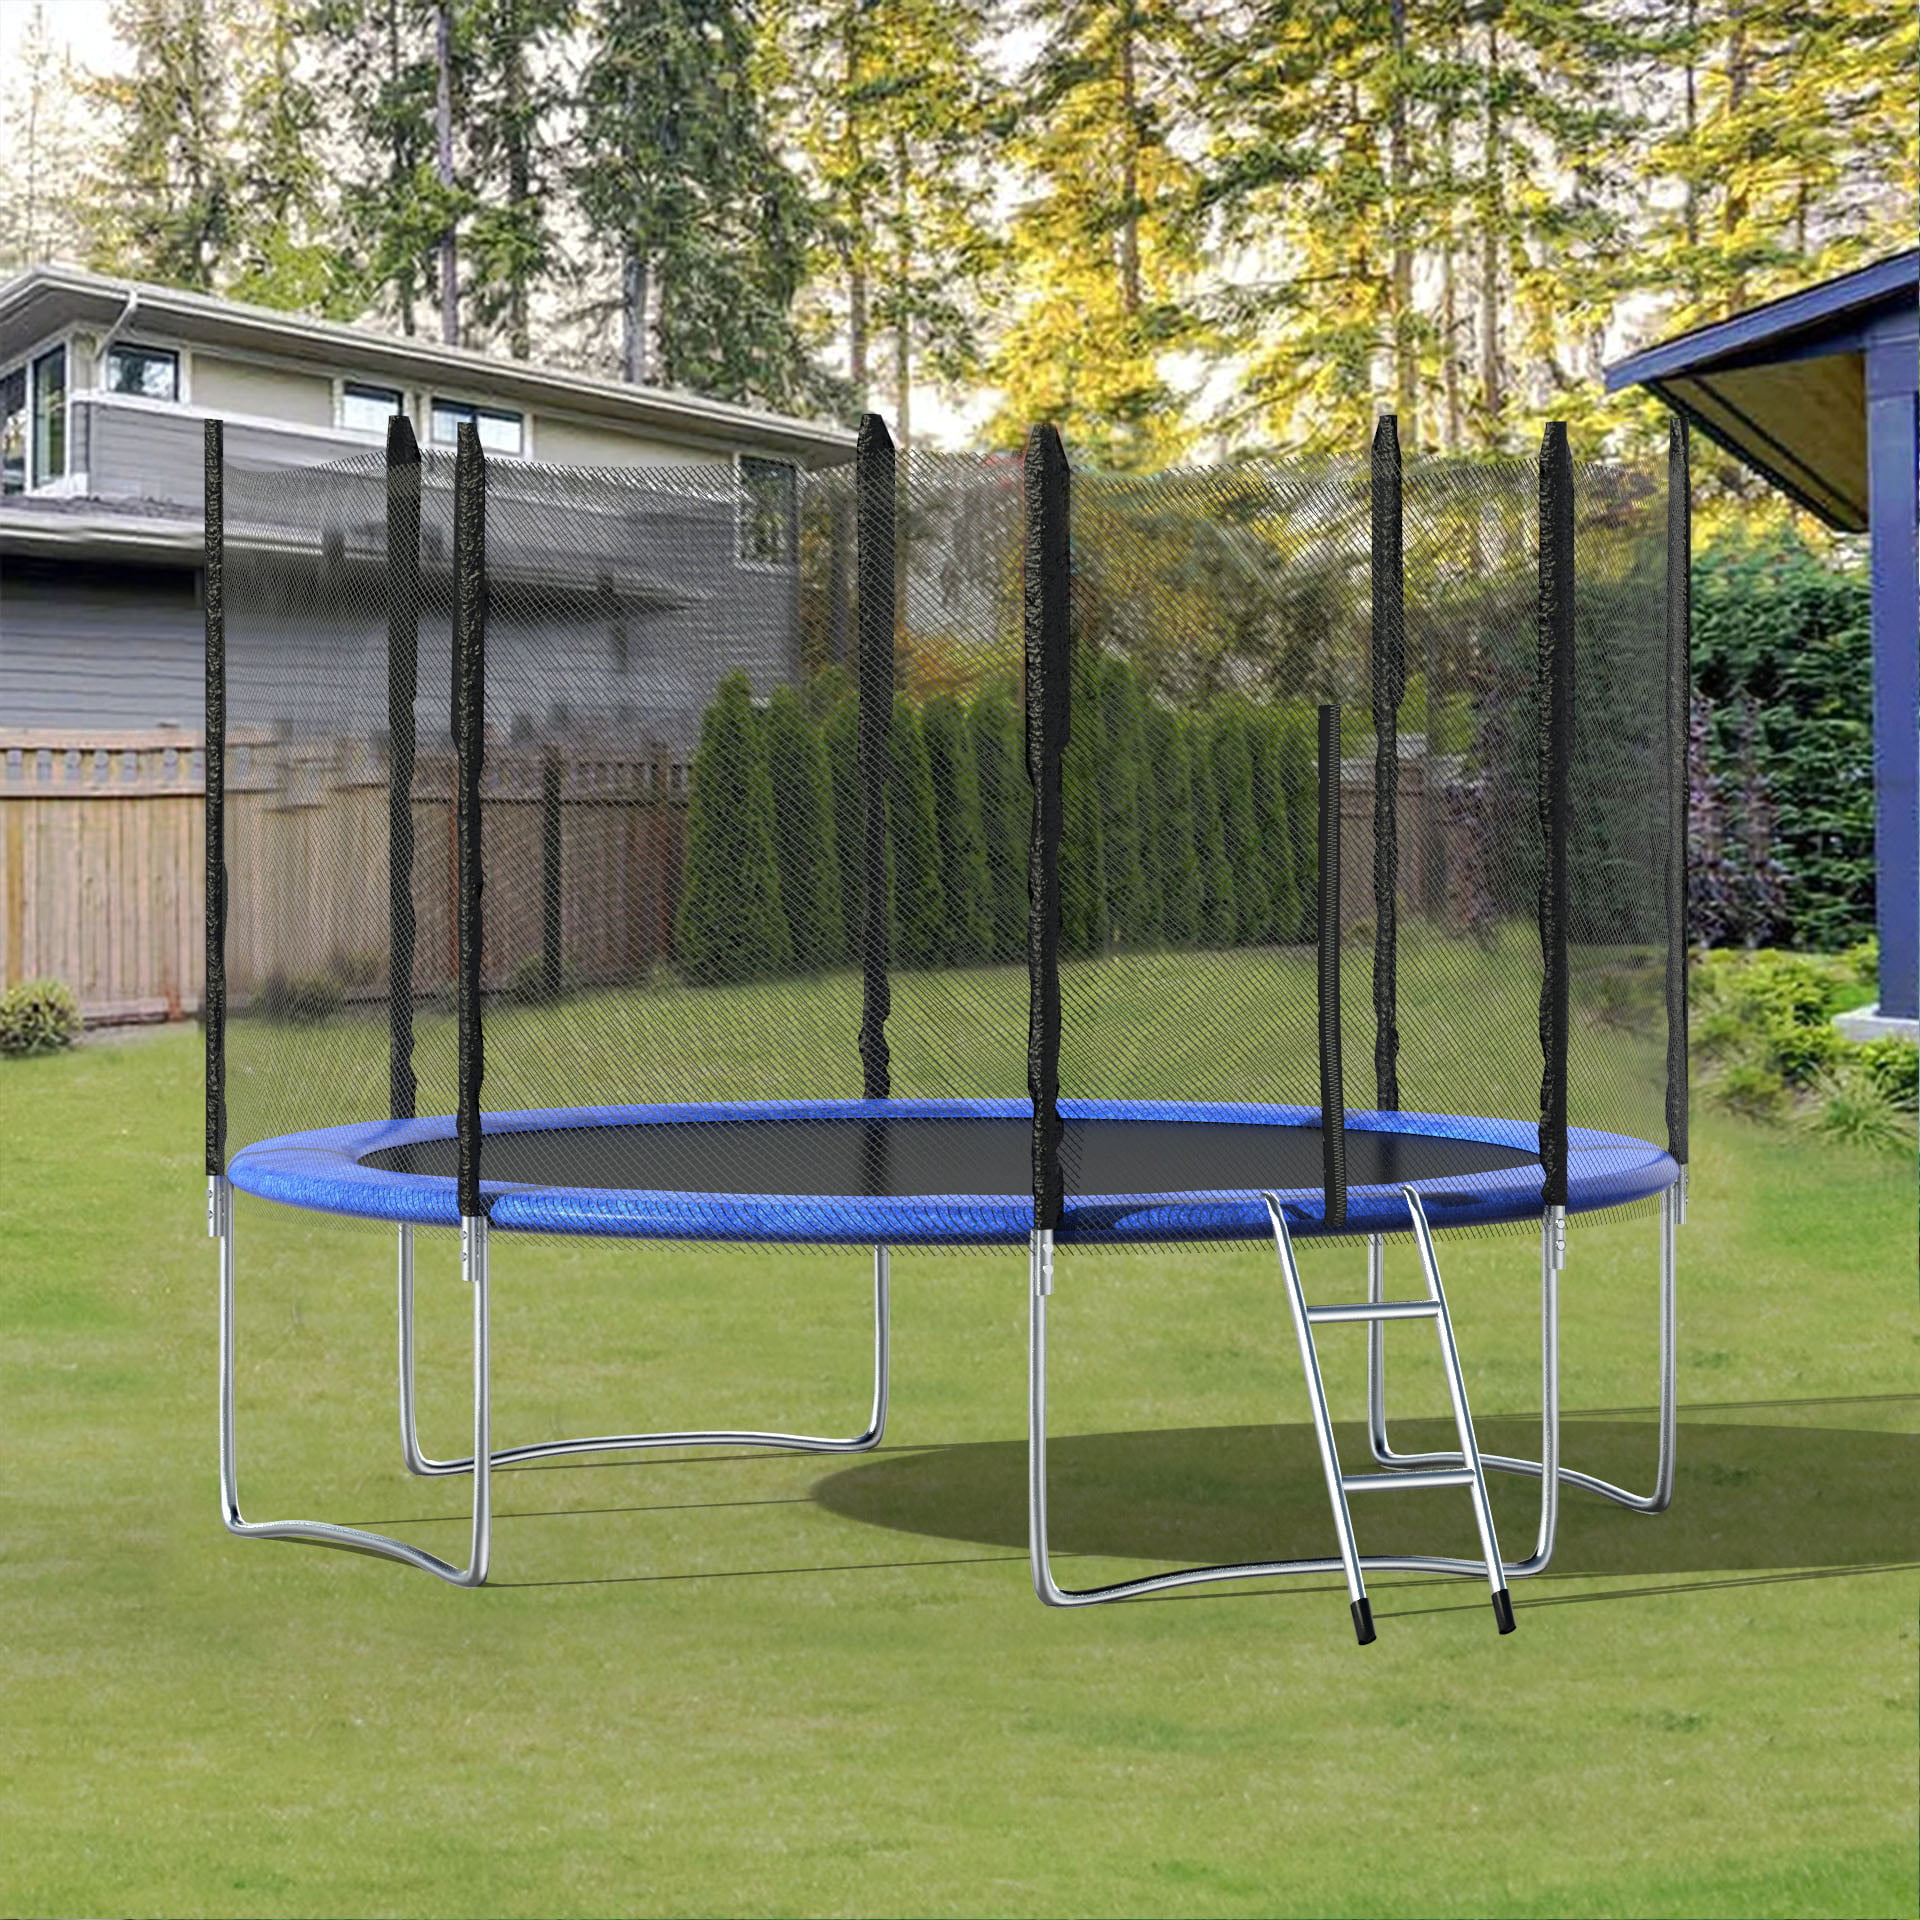 Children Backyard Game 12 Ft Jumping Mat and Spring Cover Padding Tent with Ladder Viouyh Trampoline with Safety Enclosure for Kids 